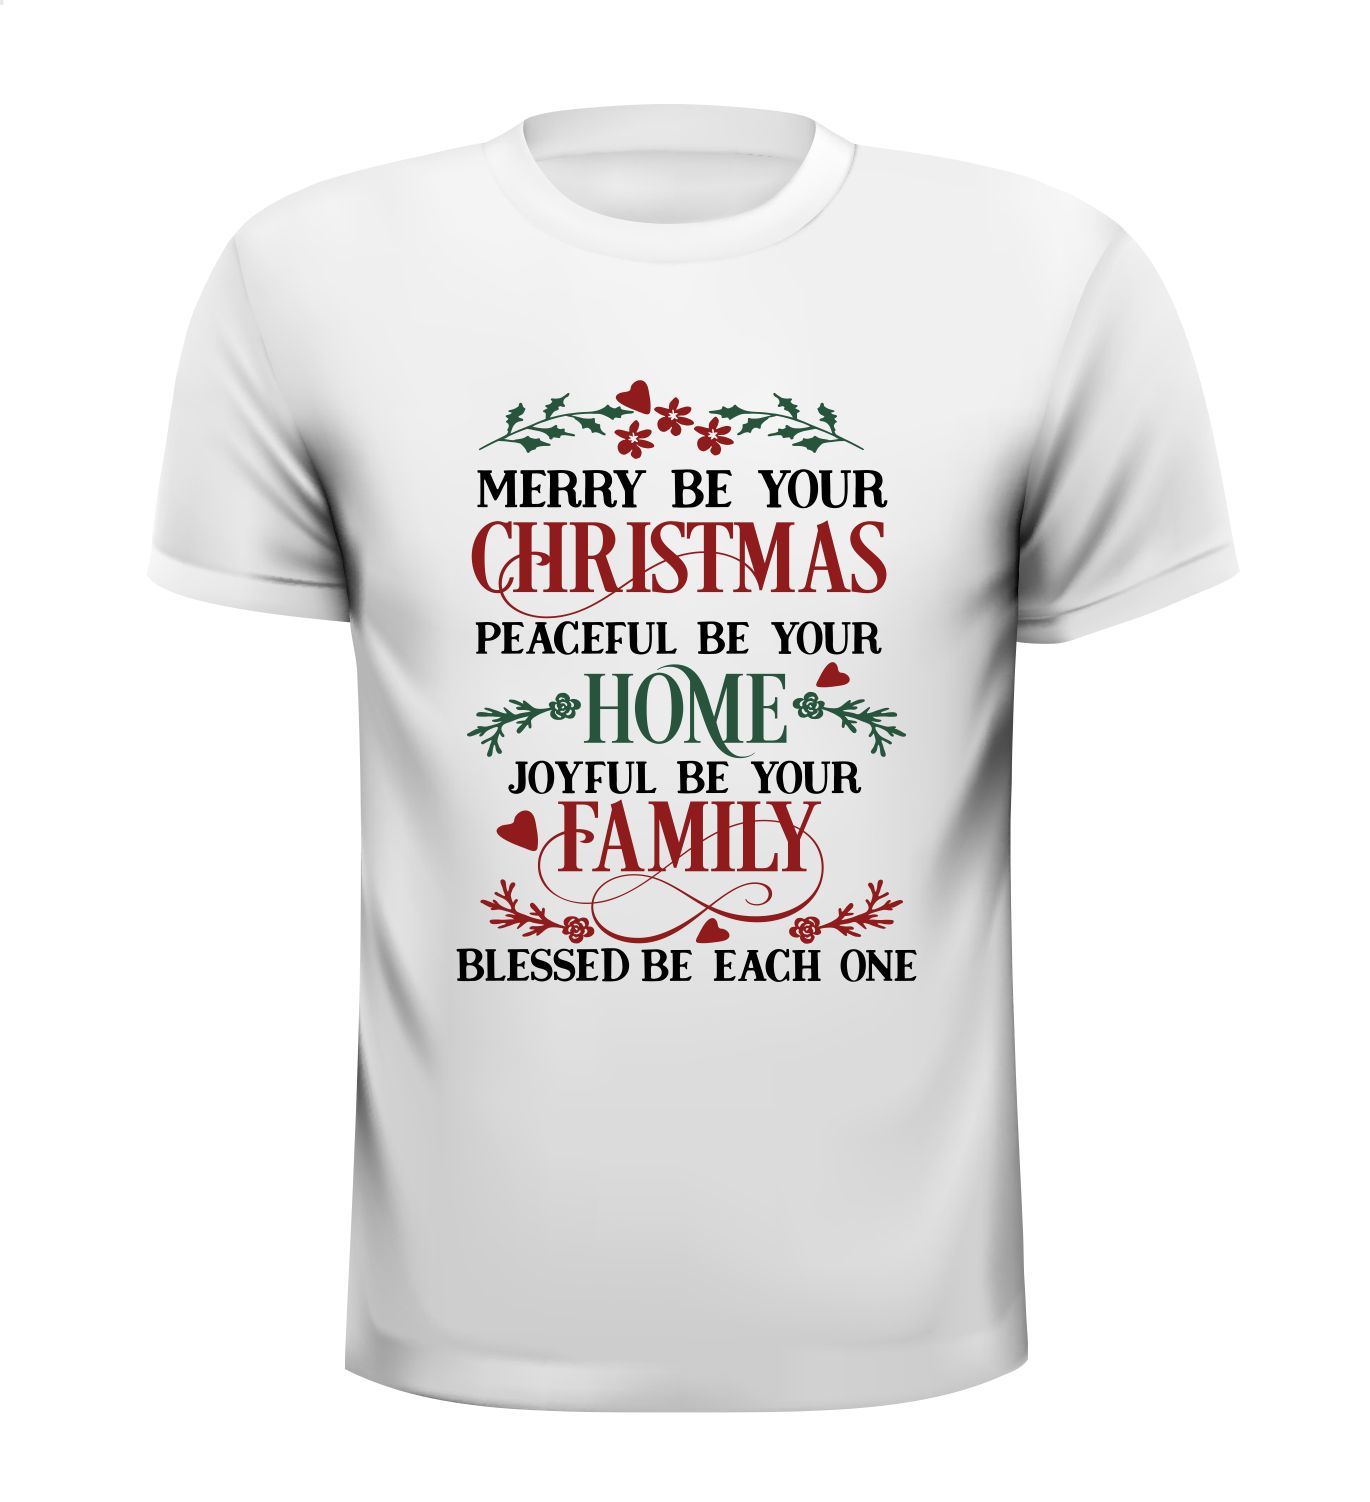 T-shirt Merry be you Christmas peaceful be your home Joyfull be your family Blessed be each on